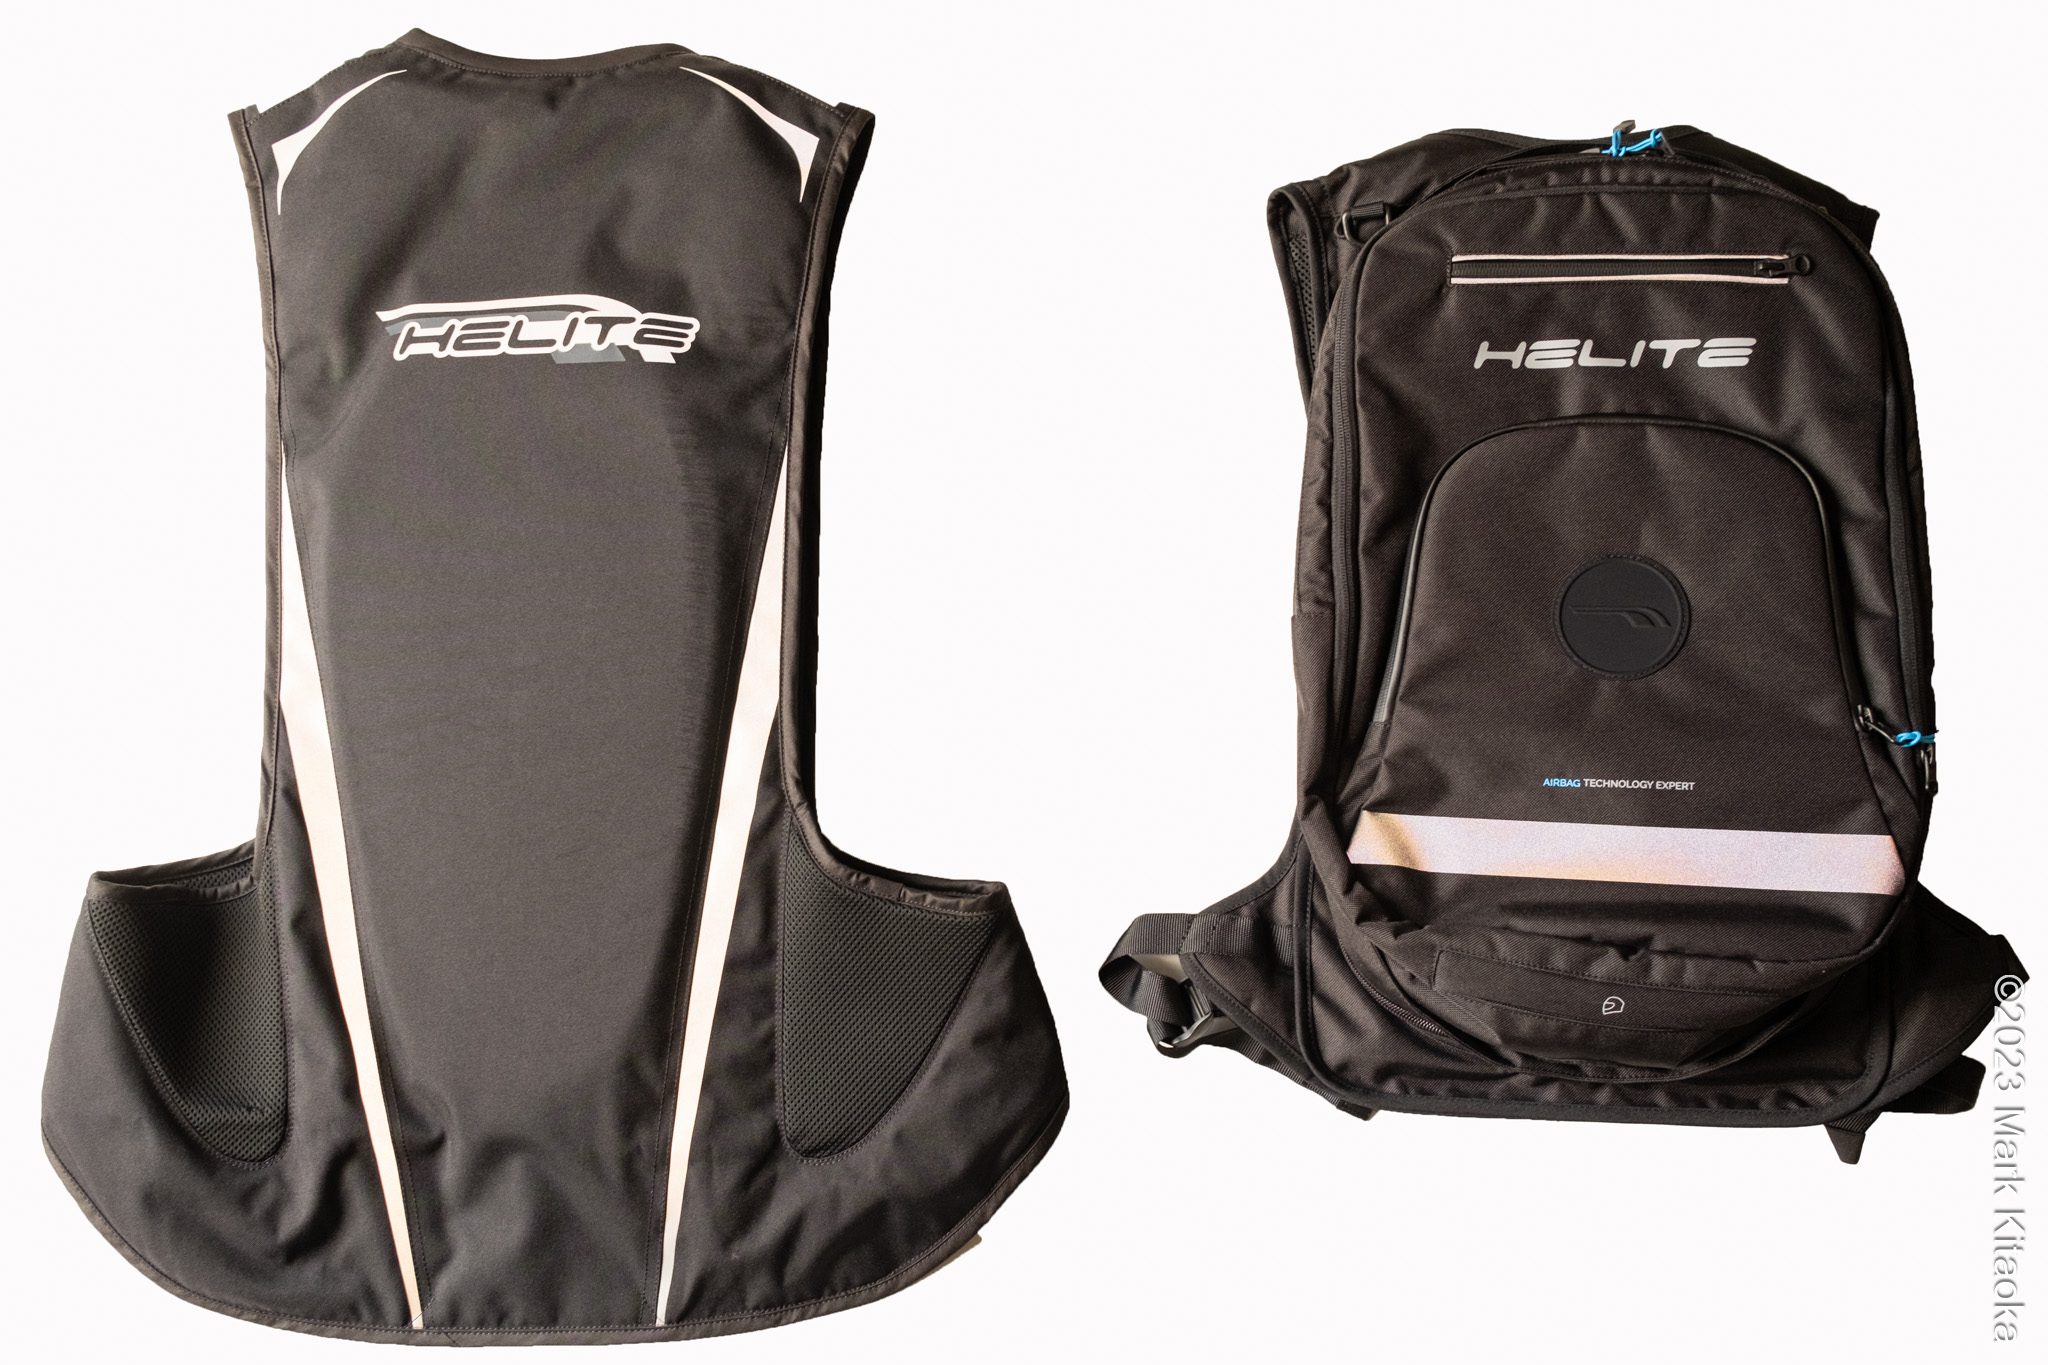 Rear view of the airbag backpack